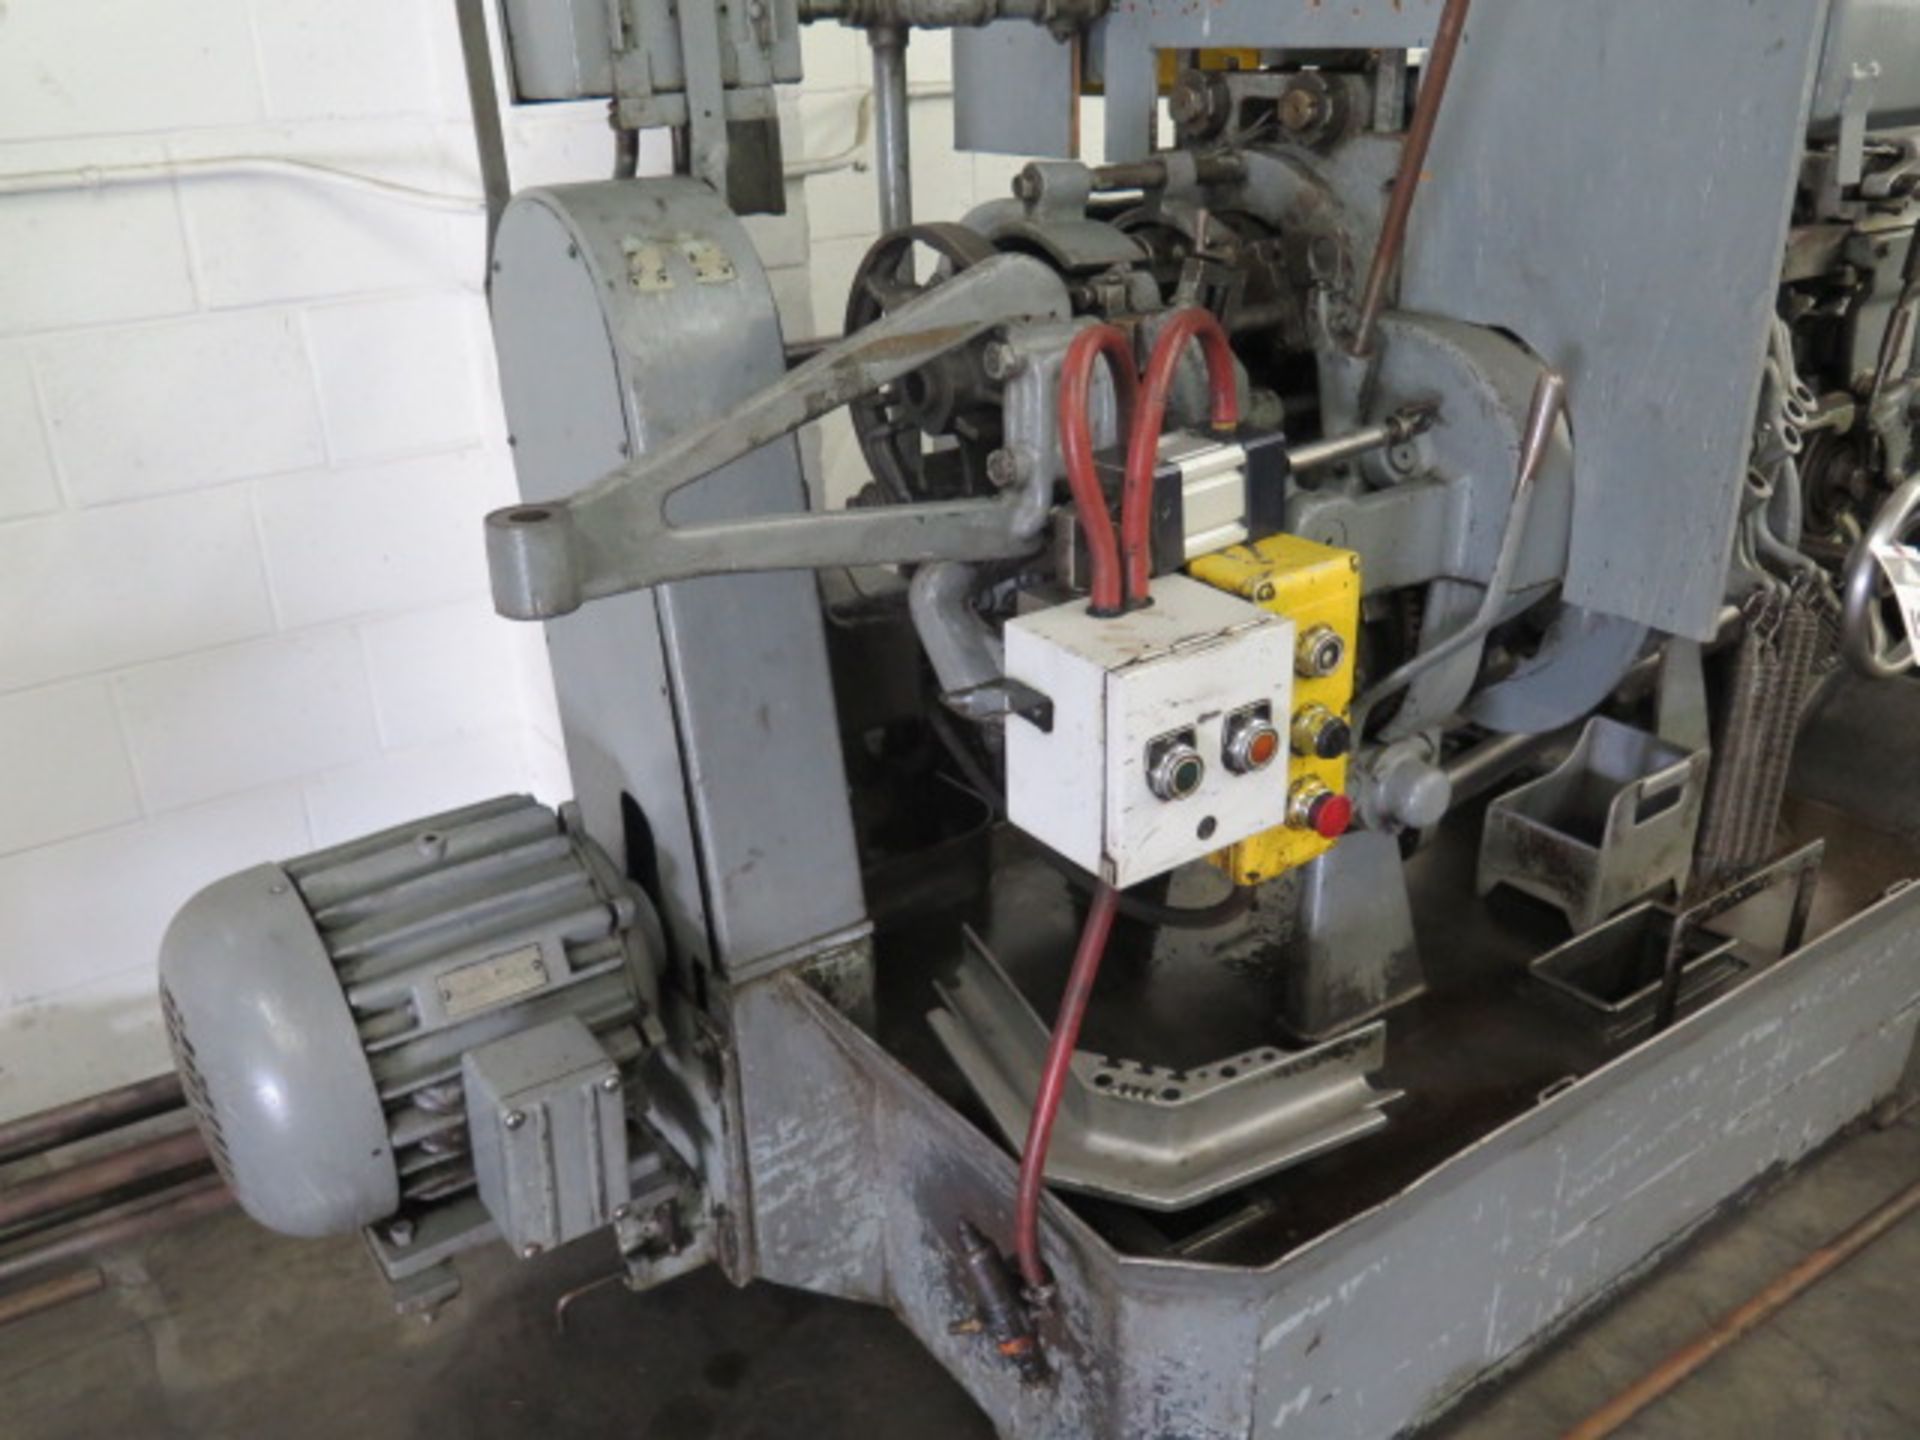 Davenport mdl. B 5-Spindle Automatic Screw Machine s/n 6482 w/ Drill Stations, 4-Cross Slides, - Image 3 of 6